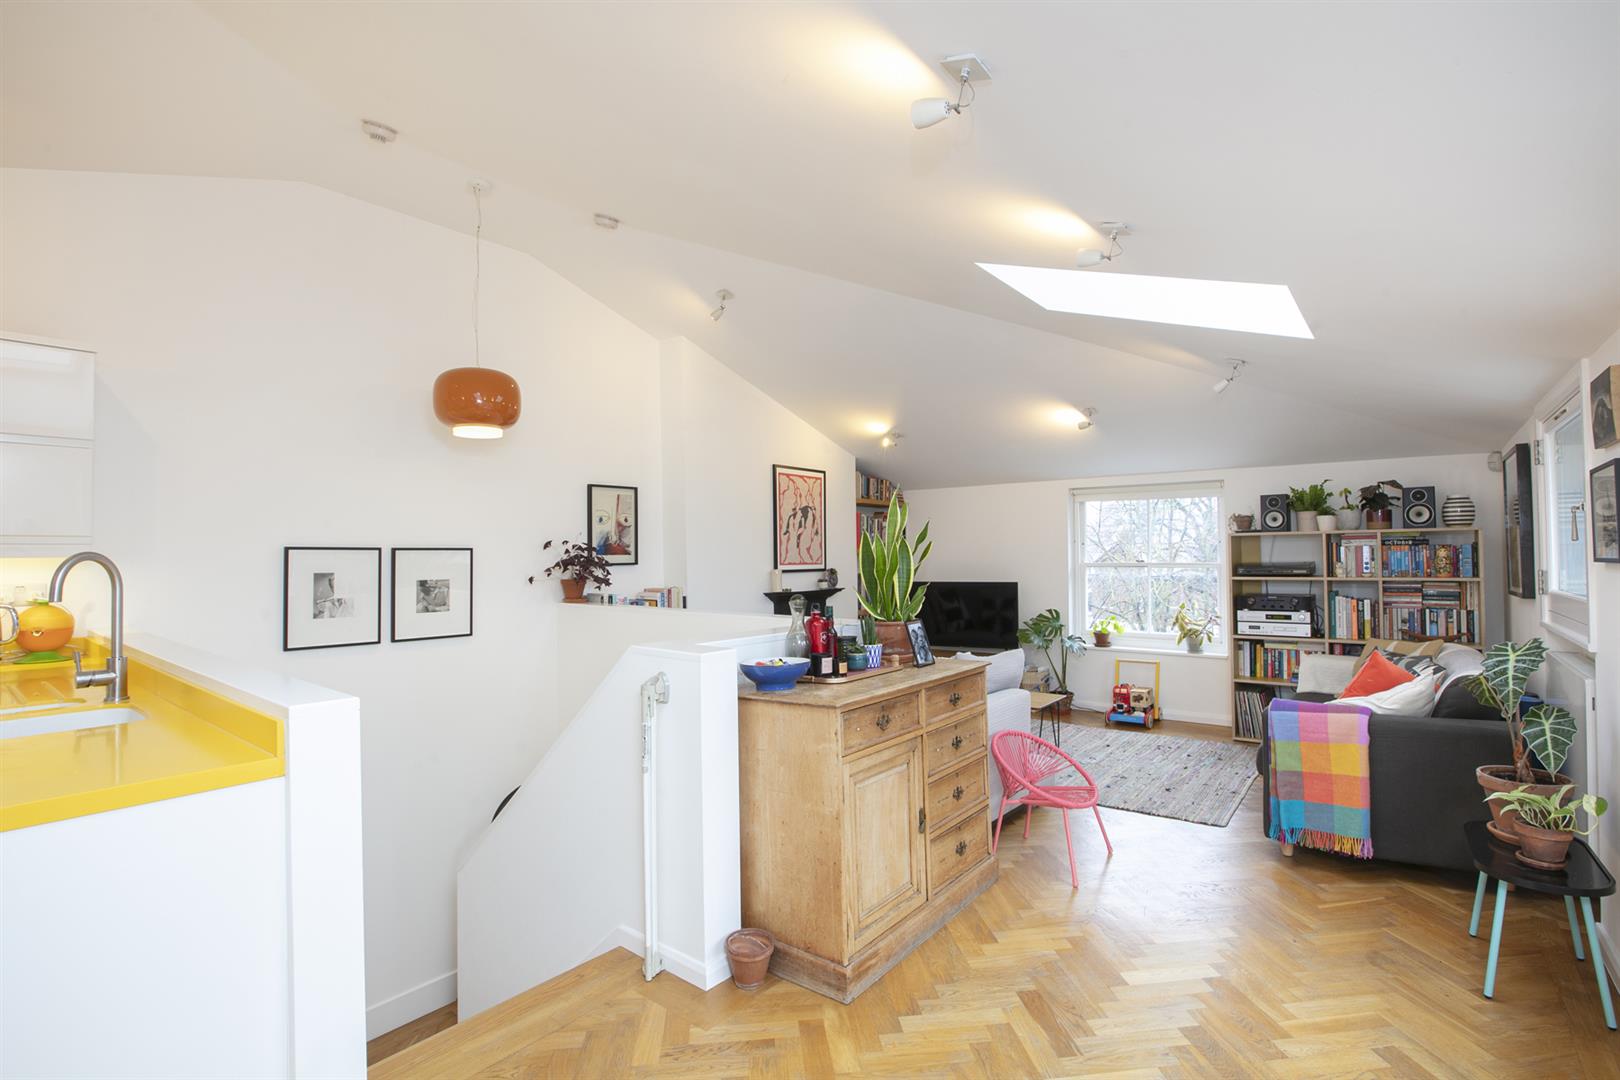 Flat - Conversion Under Offer in Holly Grove, Peckham, SE15 893 view12